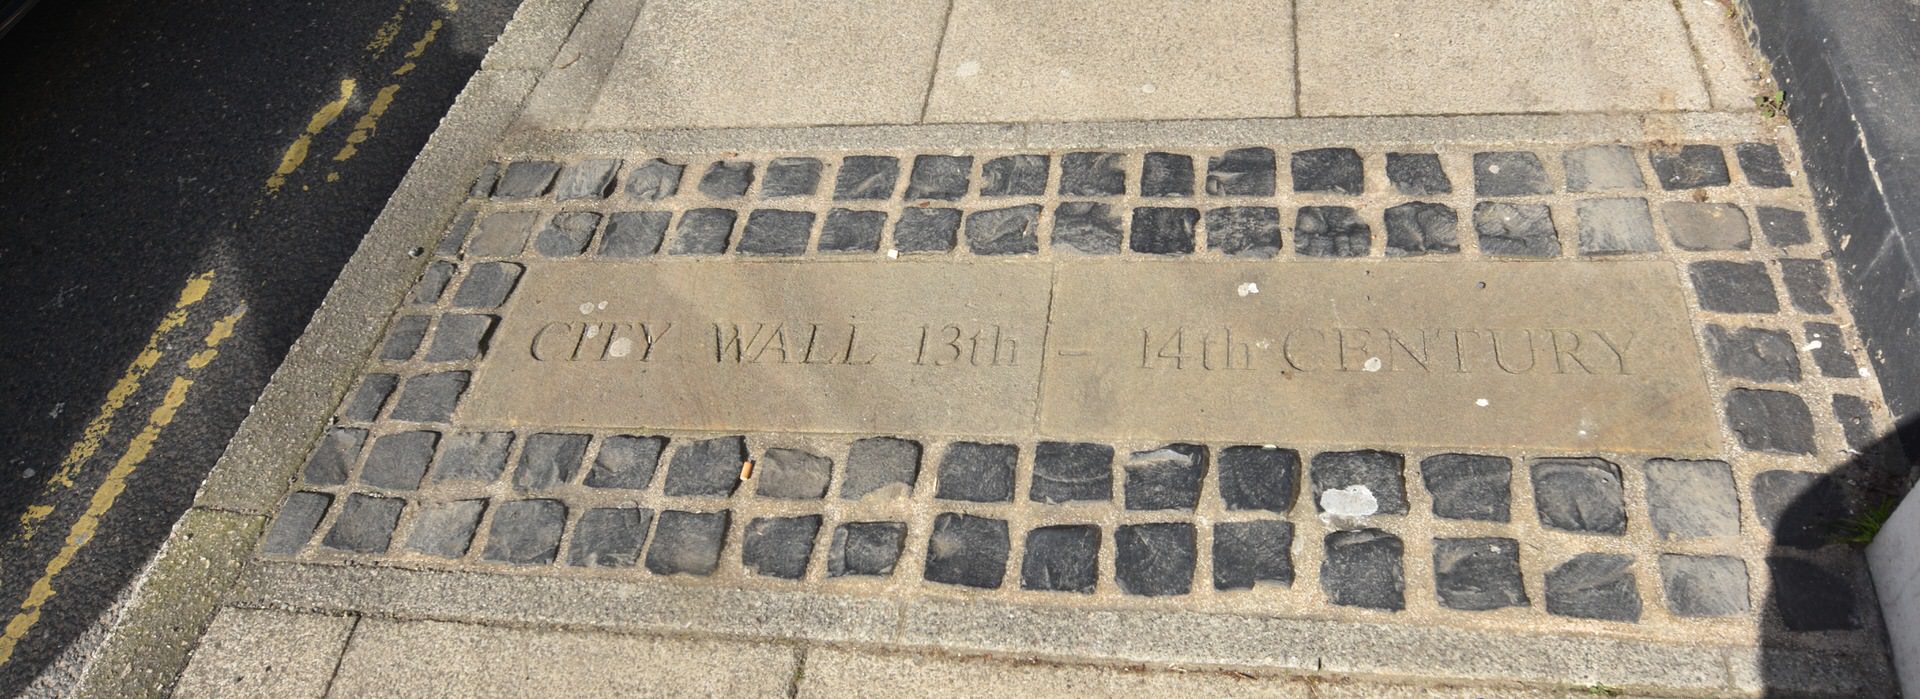 City wall marker on pavement of St. Augustines Street